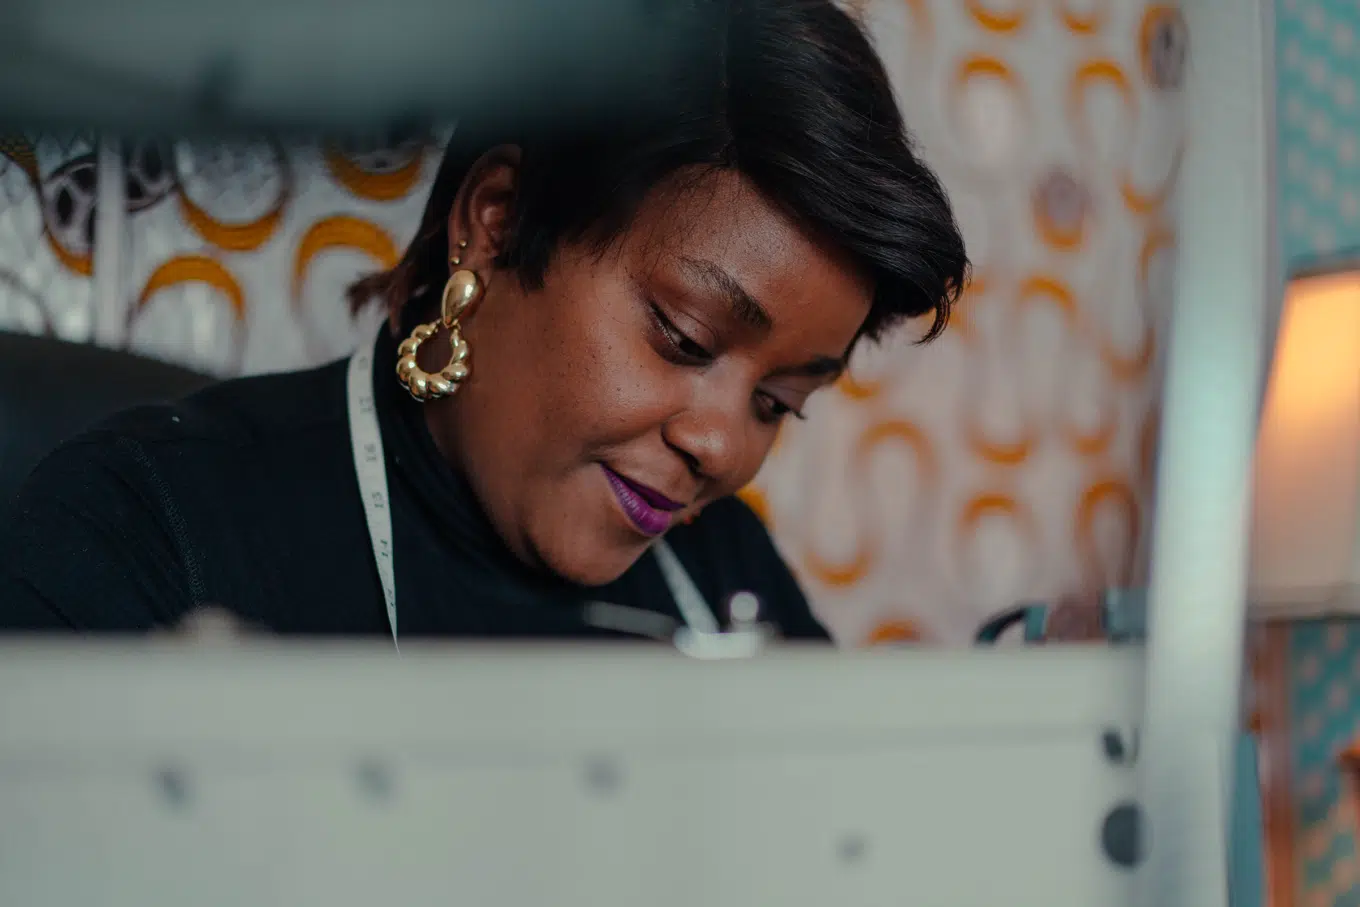 Dark skinned woman with a short pixie cut wearing black long sleeved turtle neck shirt and bold gold earrings, sits at her work station with a measuring tape around her neck. Her face in the image is framed by a sewing machine in the front.